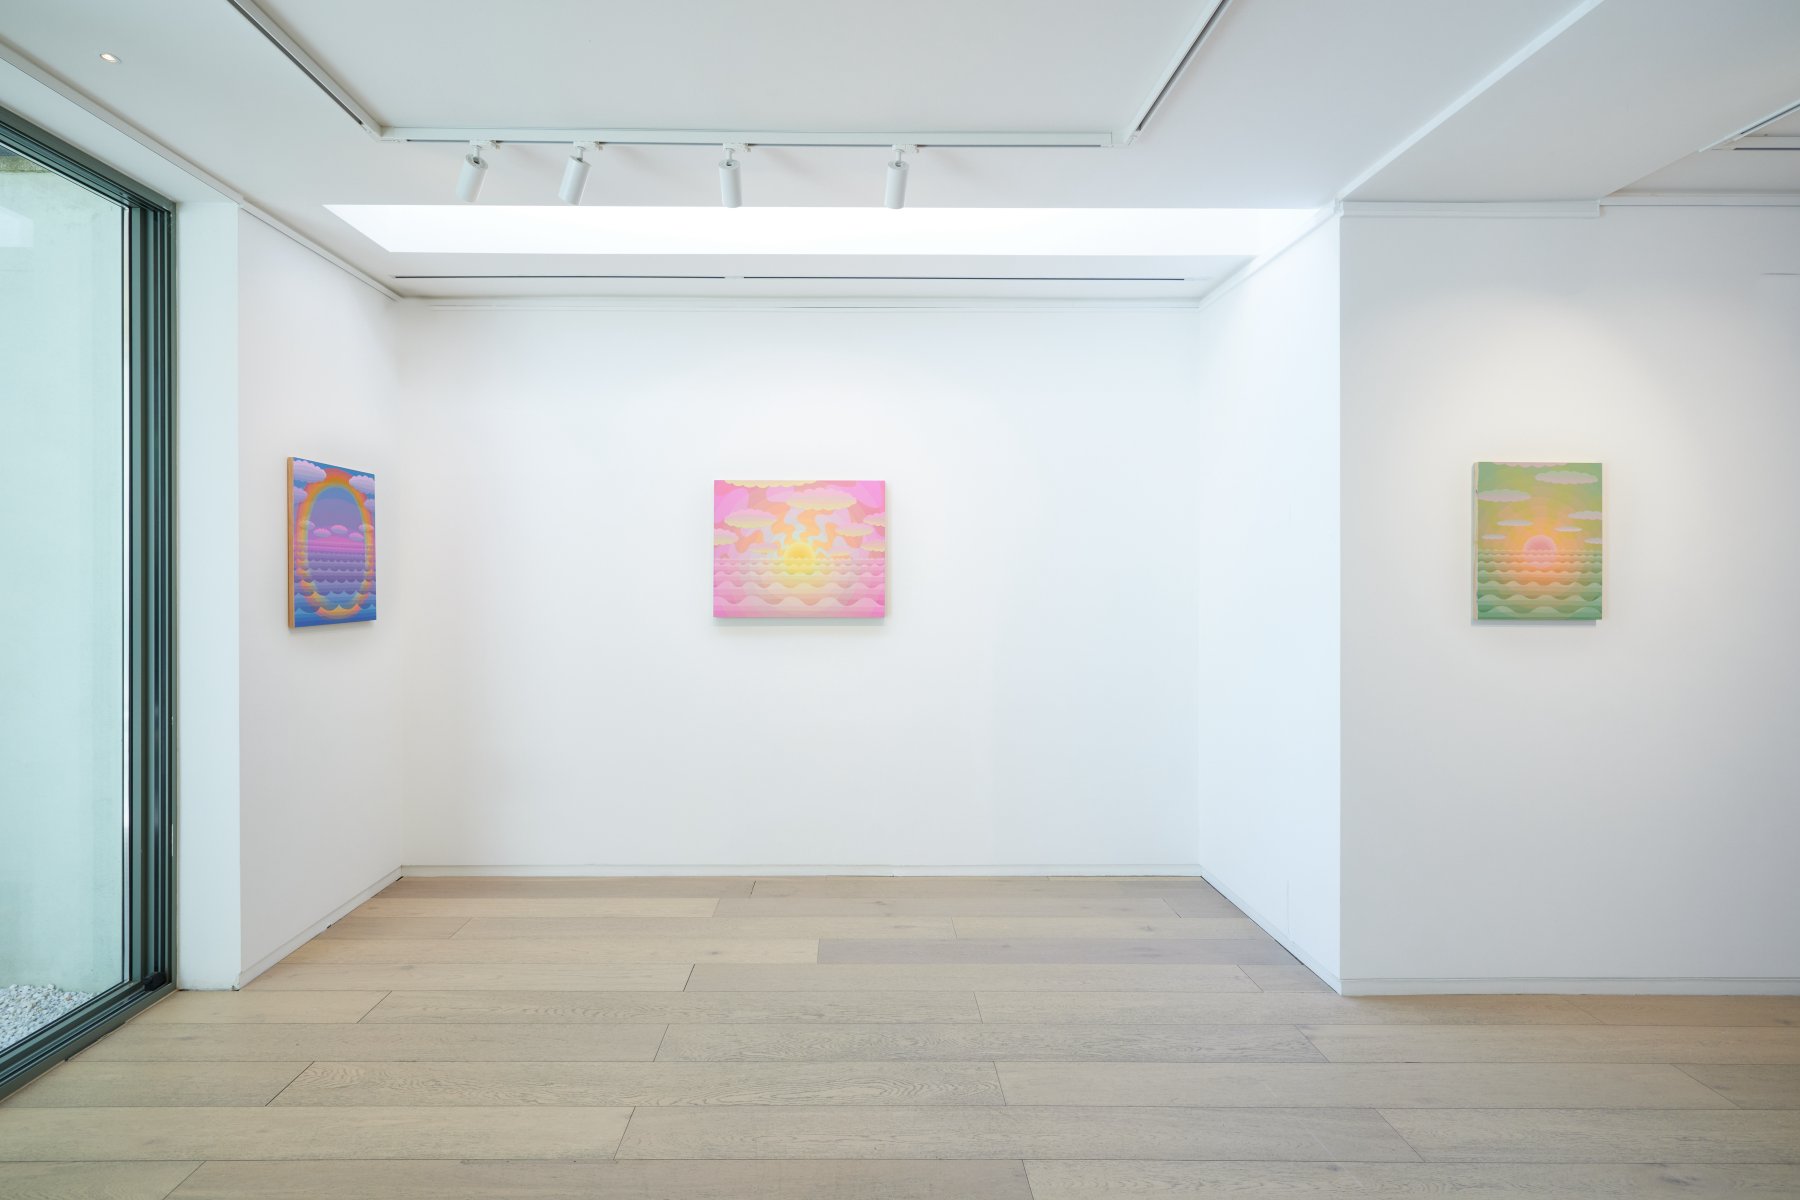 Installation image for Amy Lincoln - Rainbow Sky, at Taymour Grahne Projects